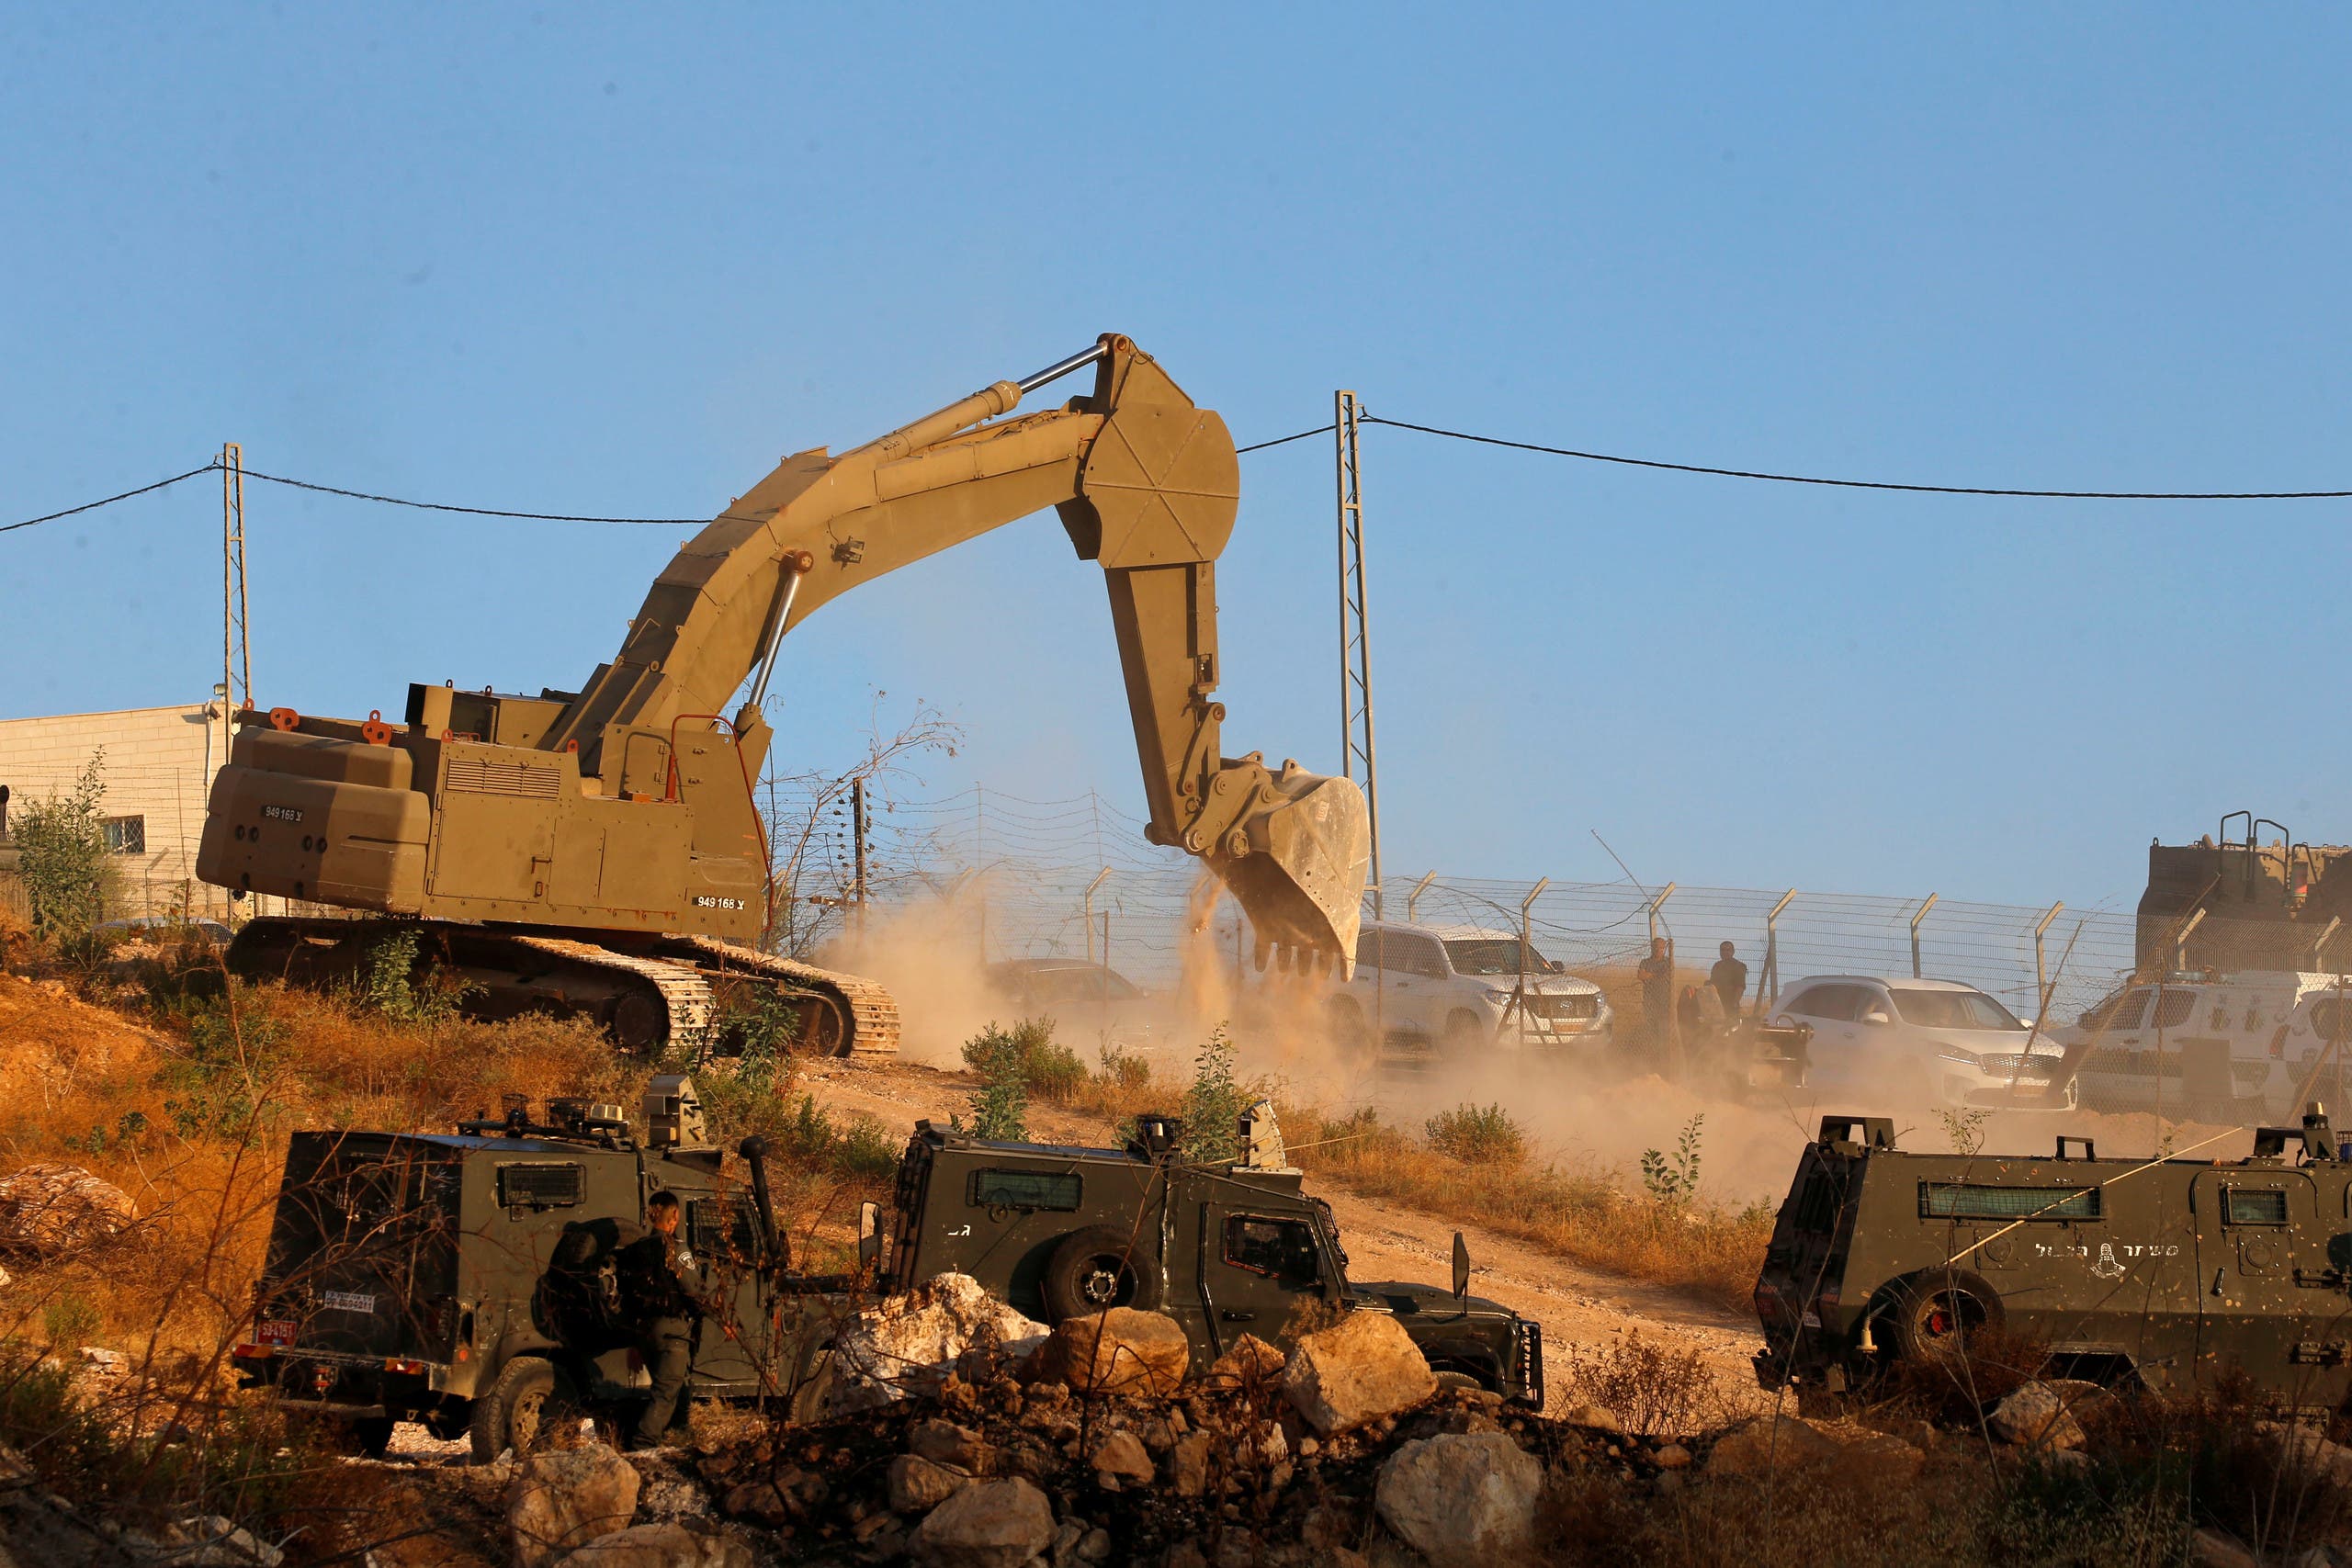 An Israeli machinery demolishes a Palestinian building in the village of Sur Baher which sits on either side of the Israeli barrier in East Jerusalem and the Israeli-occupied West Bank July 22, 2019. REUTERS